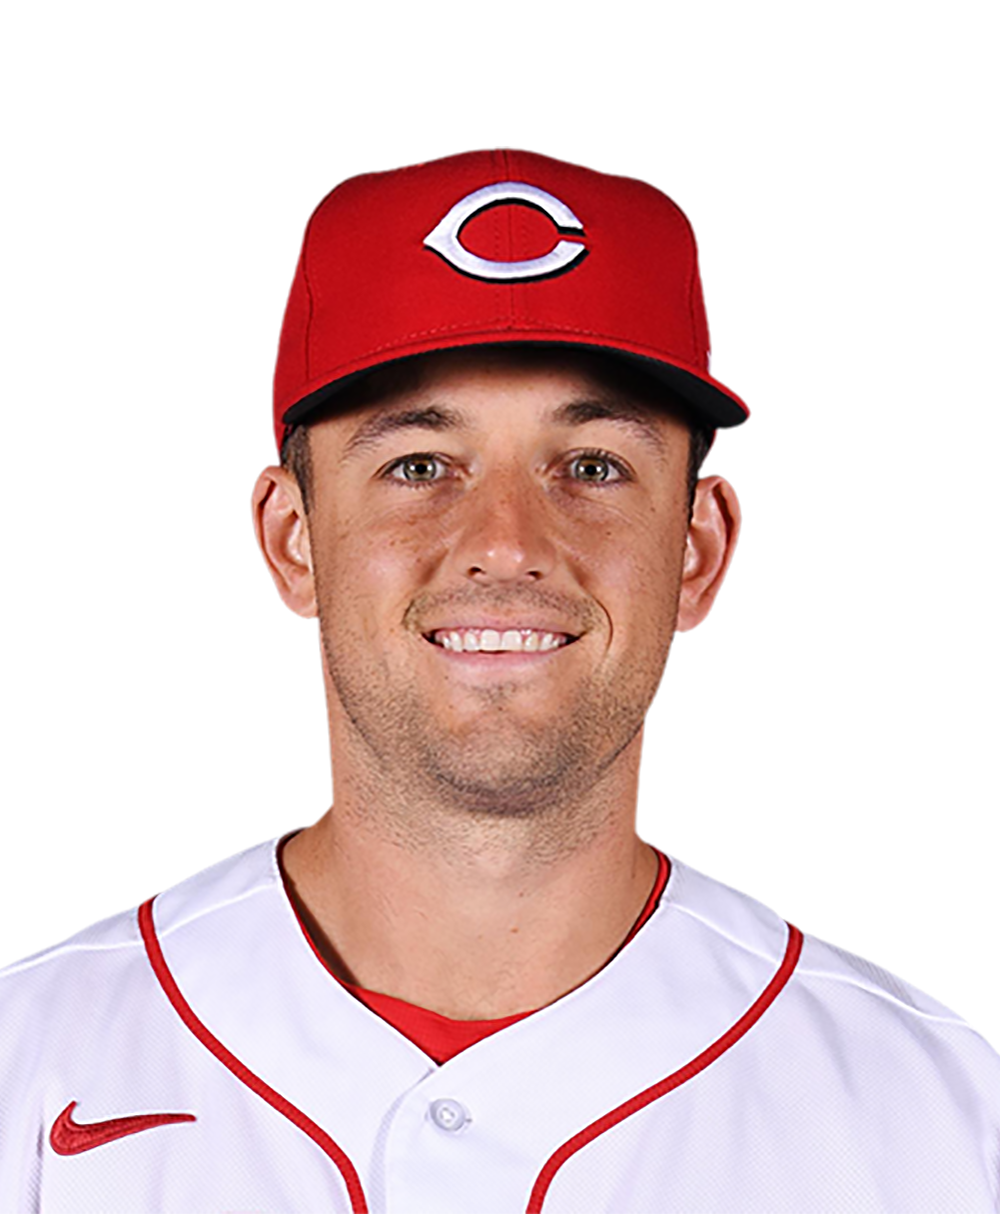 Vosler, Friedl homer to support Ashcraft in Reds' victory - The